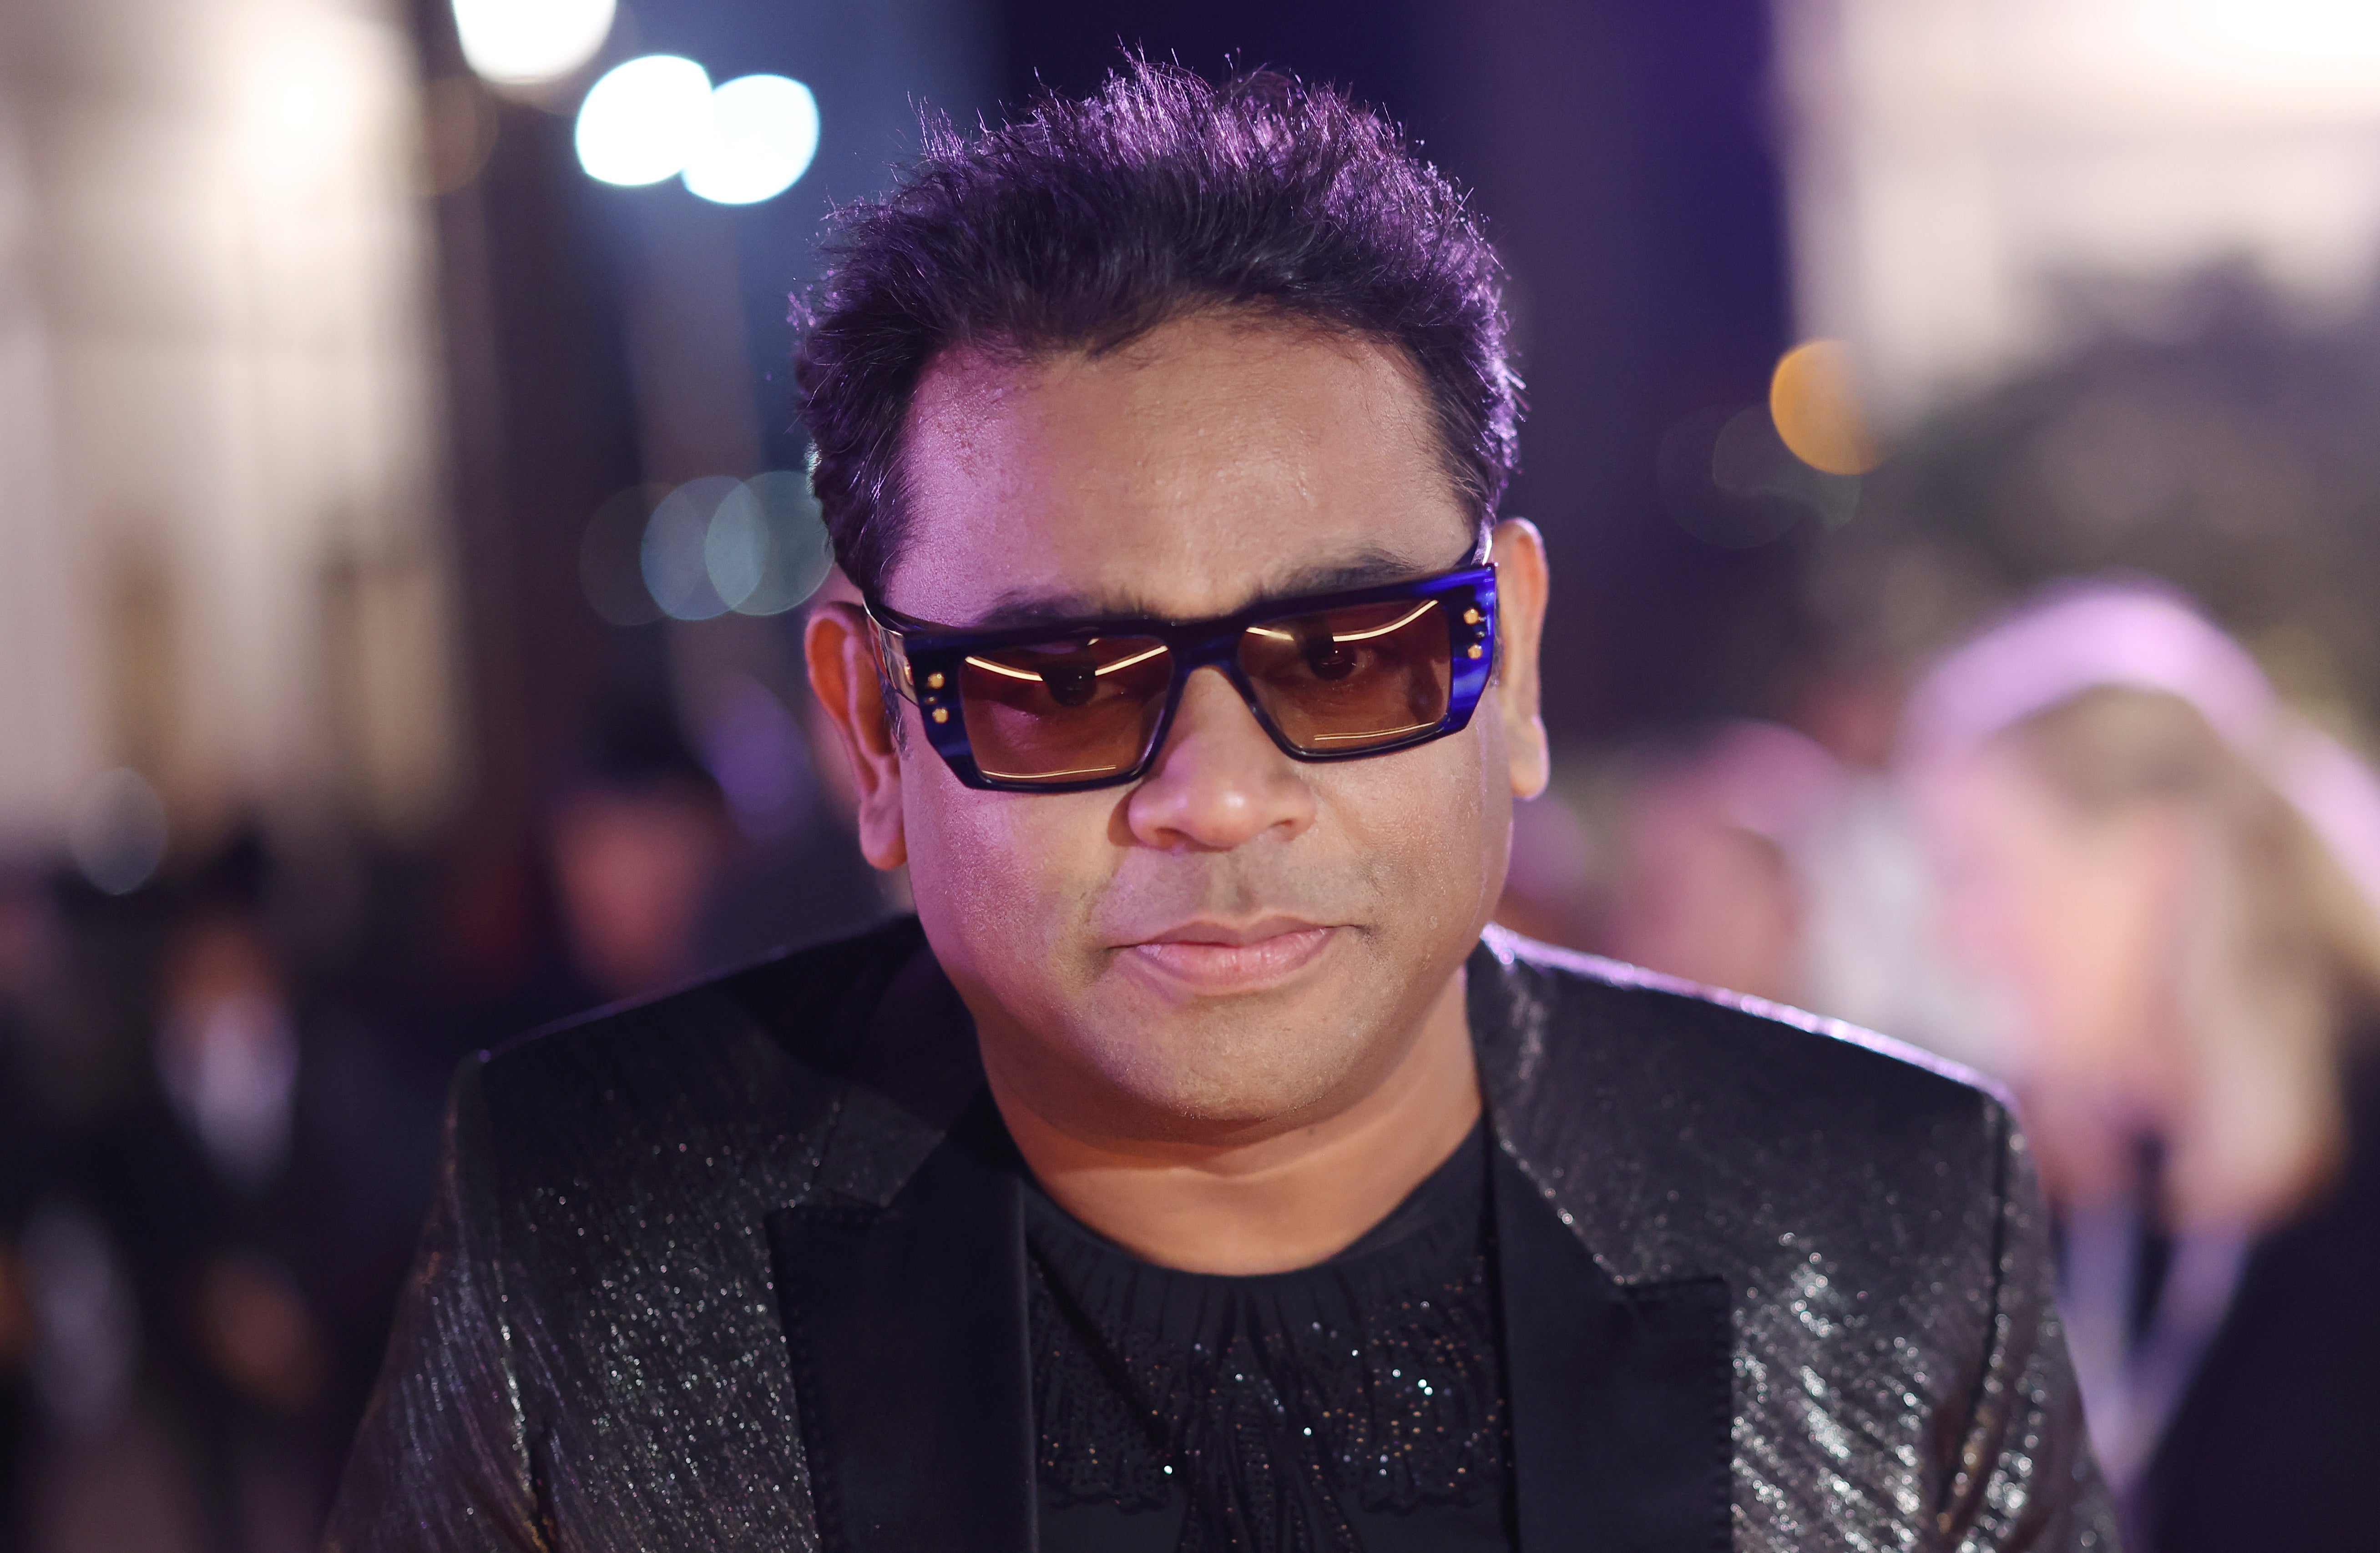 Woman groped in stampede-like situation at AR Rahman concert The Independent pic